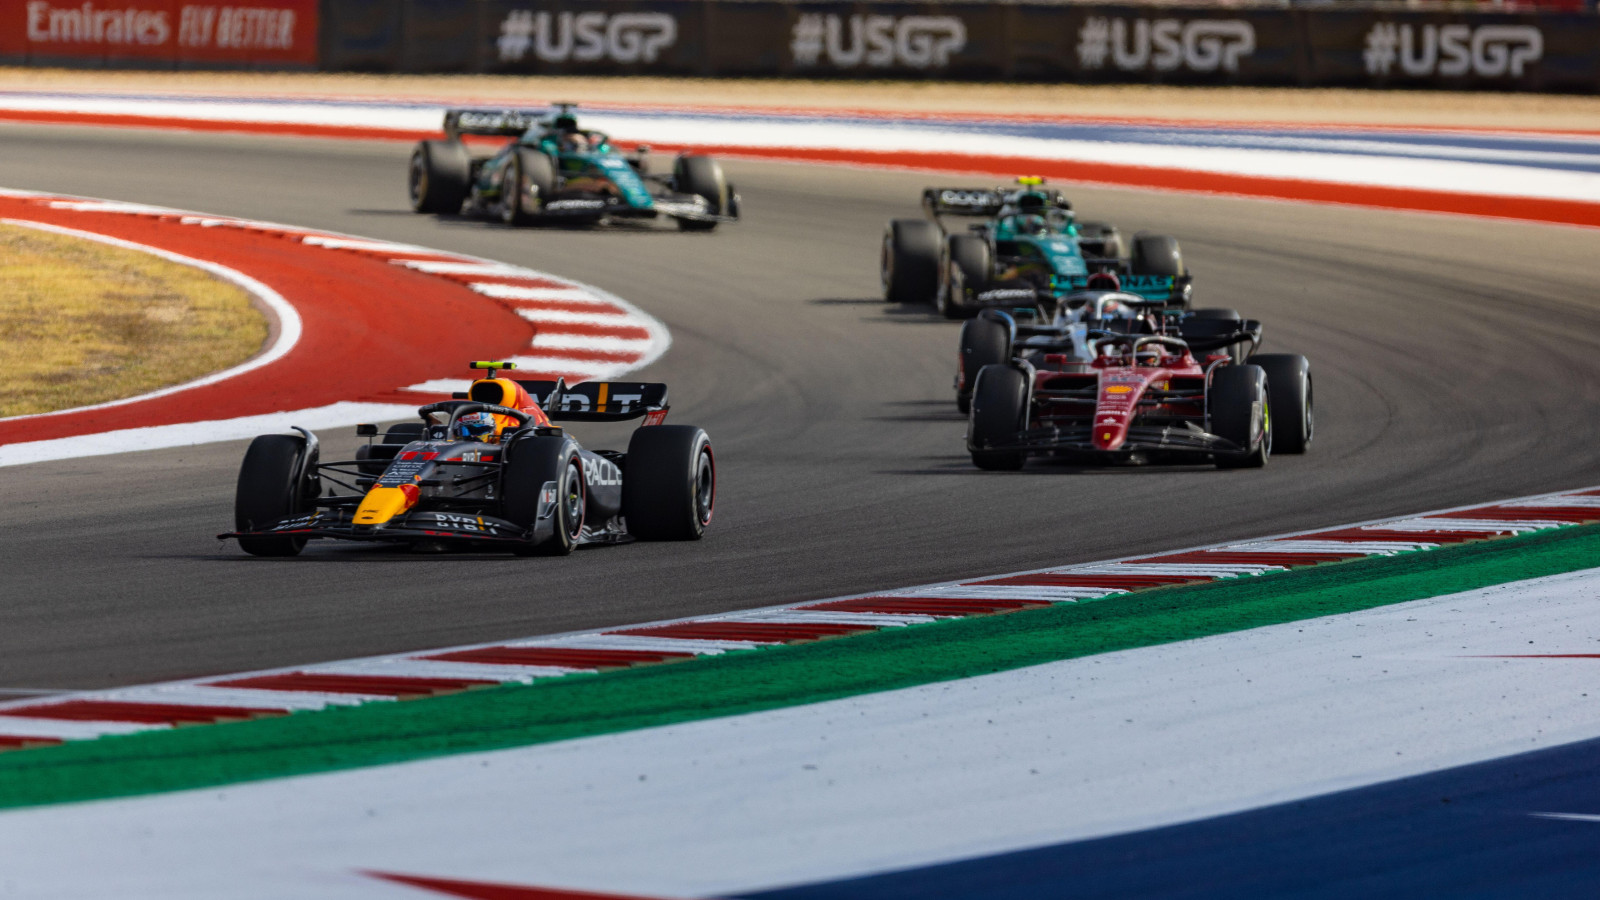 Red Bull's Sergio Perez leads the midfield fight at the United States Grand Prix. Austin, October 2022. F1 2022.